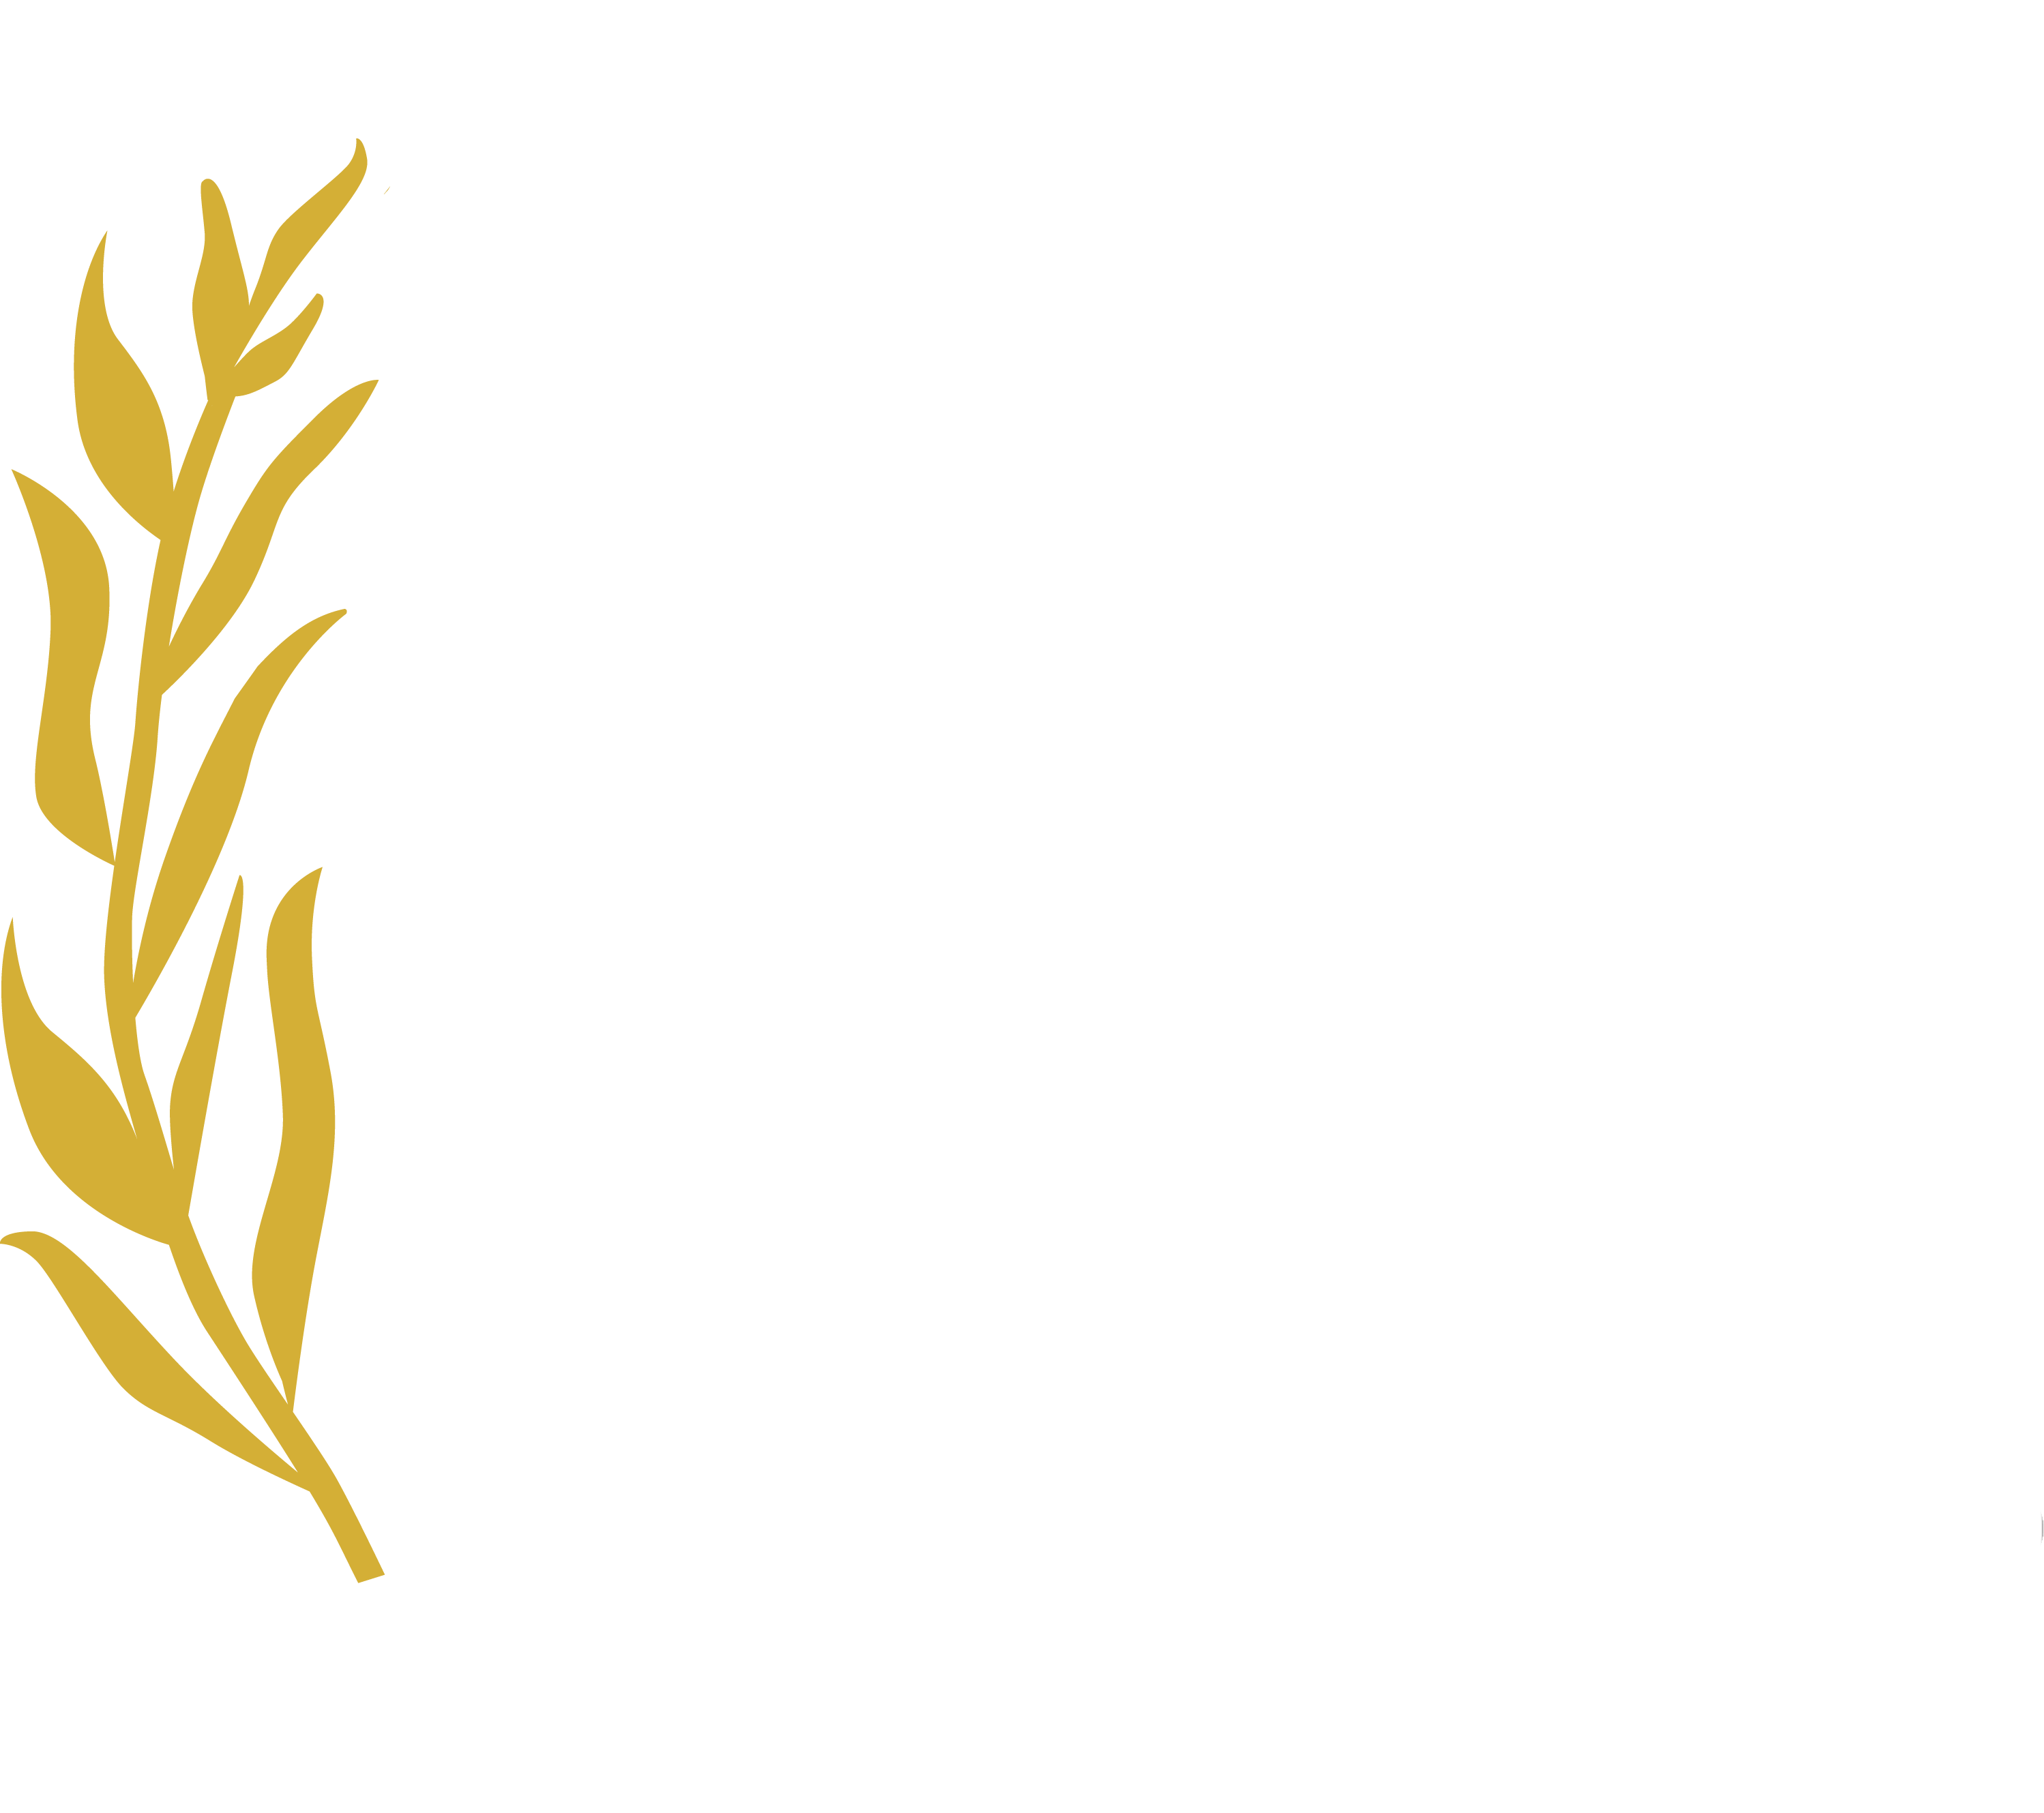 Beverly Hills Film Festival Official Site